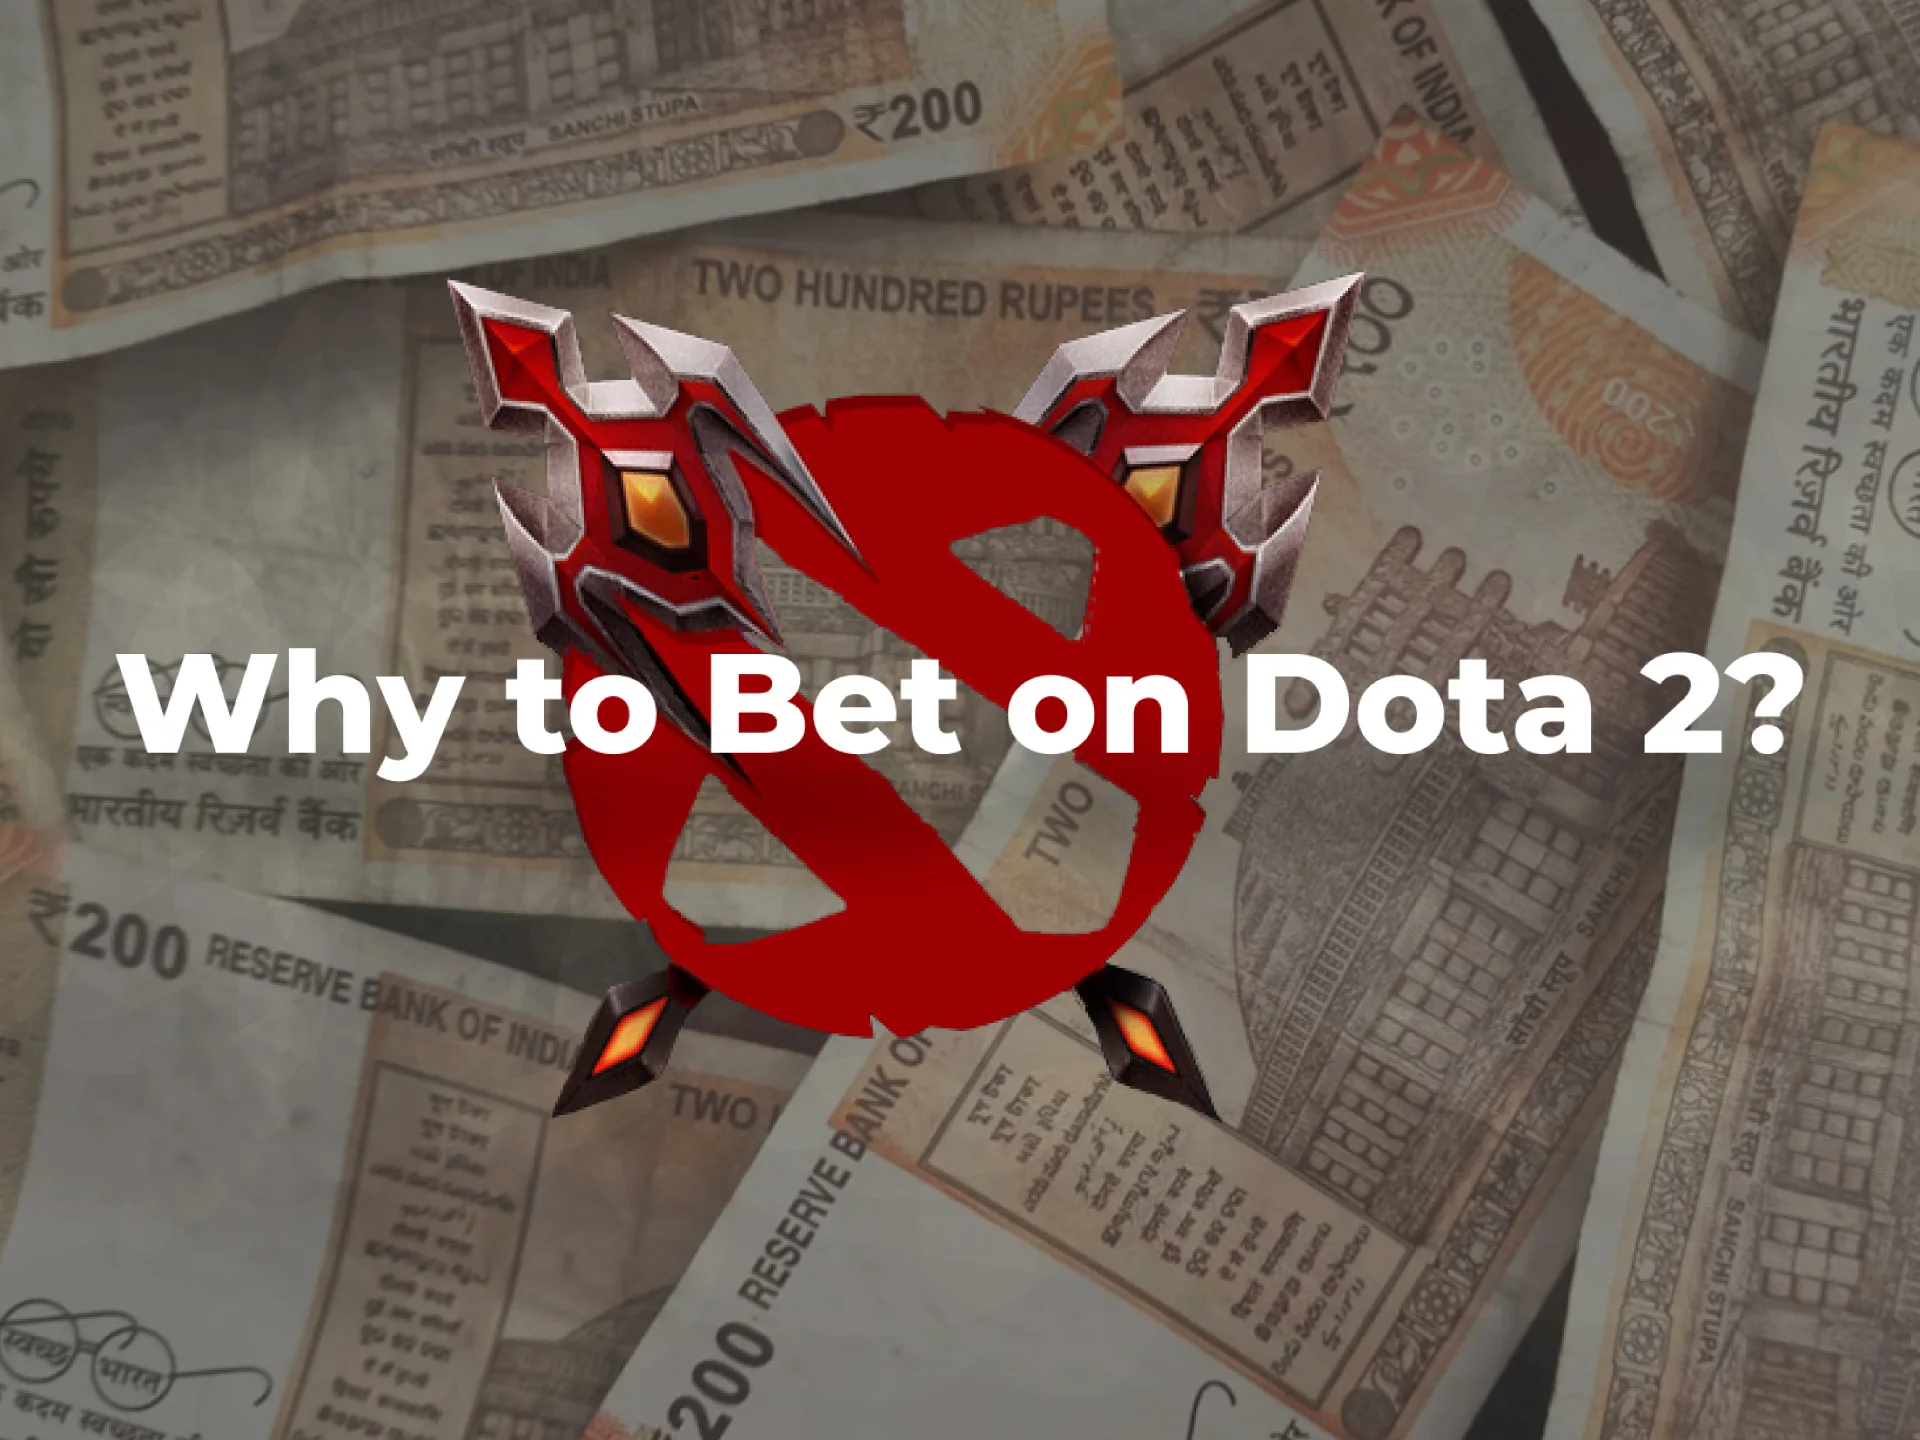 Dota 2 betting is one opportunity to make money on expertise for fans.